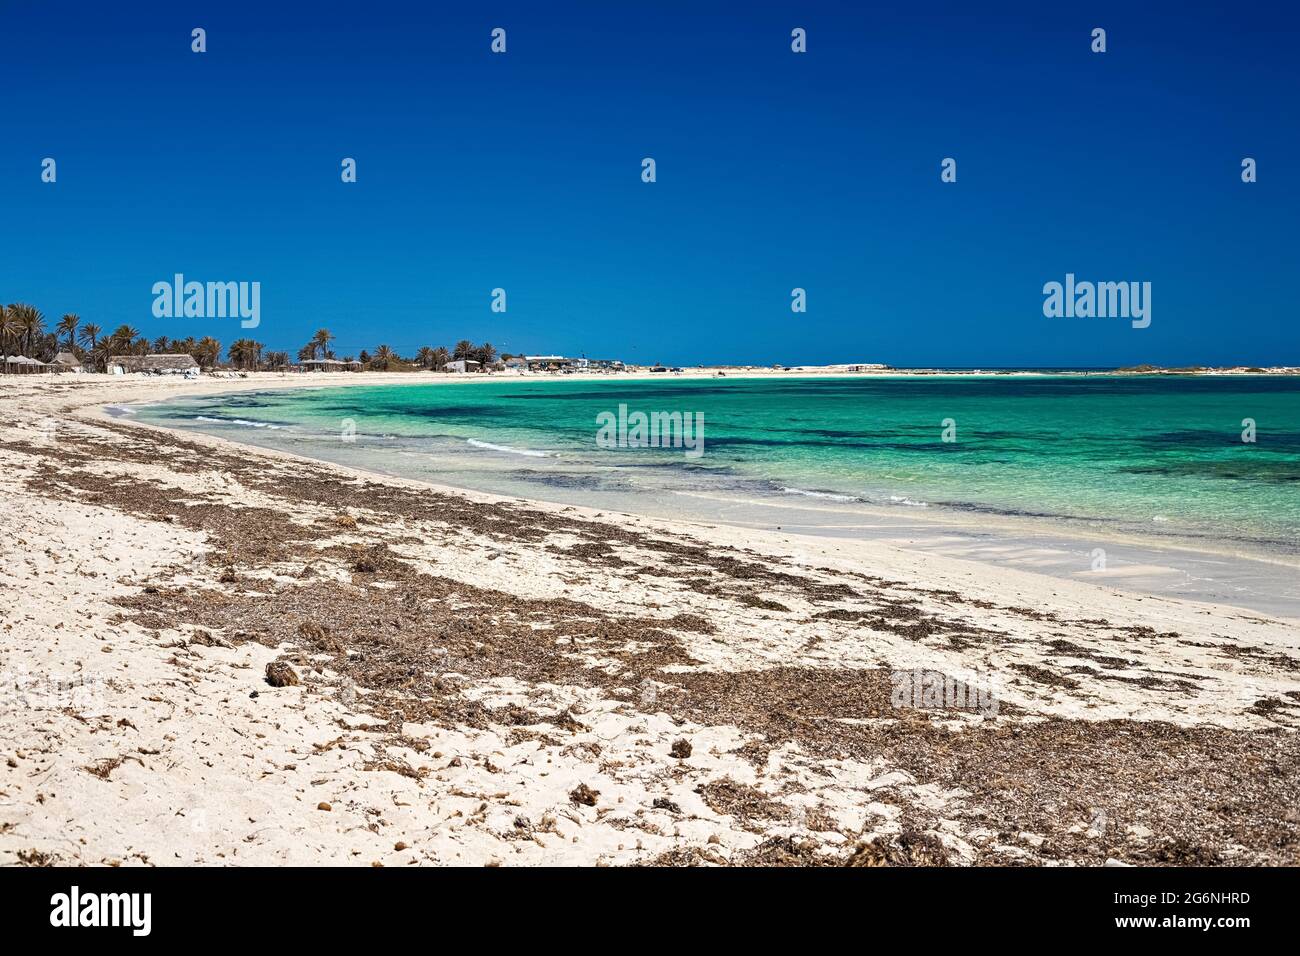 A beautiful view of the Mediterranean coast with birch water, a beach with white sand and a green palm tree. Stock Photo